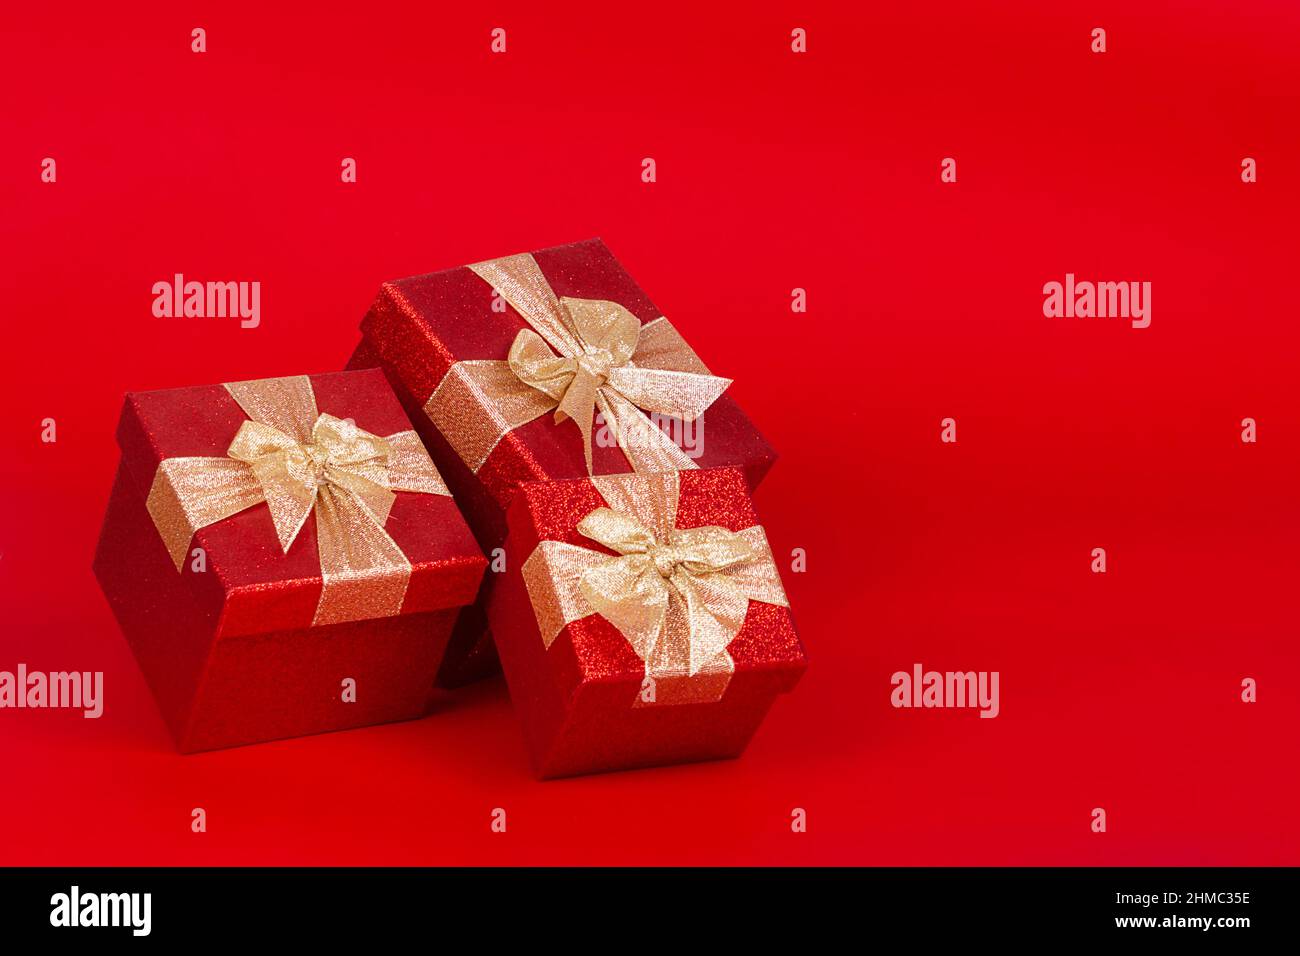 Saint Valentine's day present boxes. Red background. Stock Photo